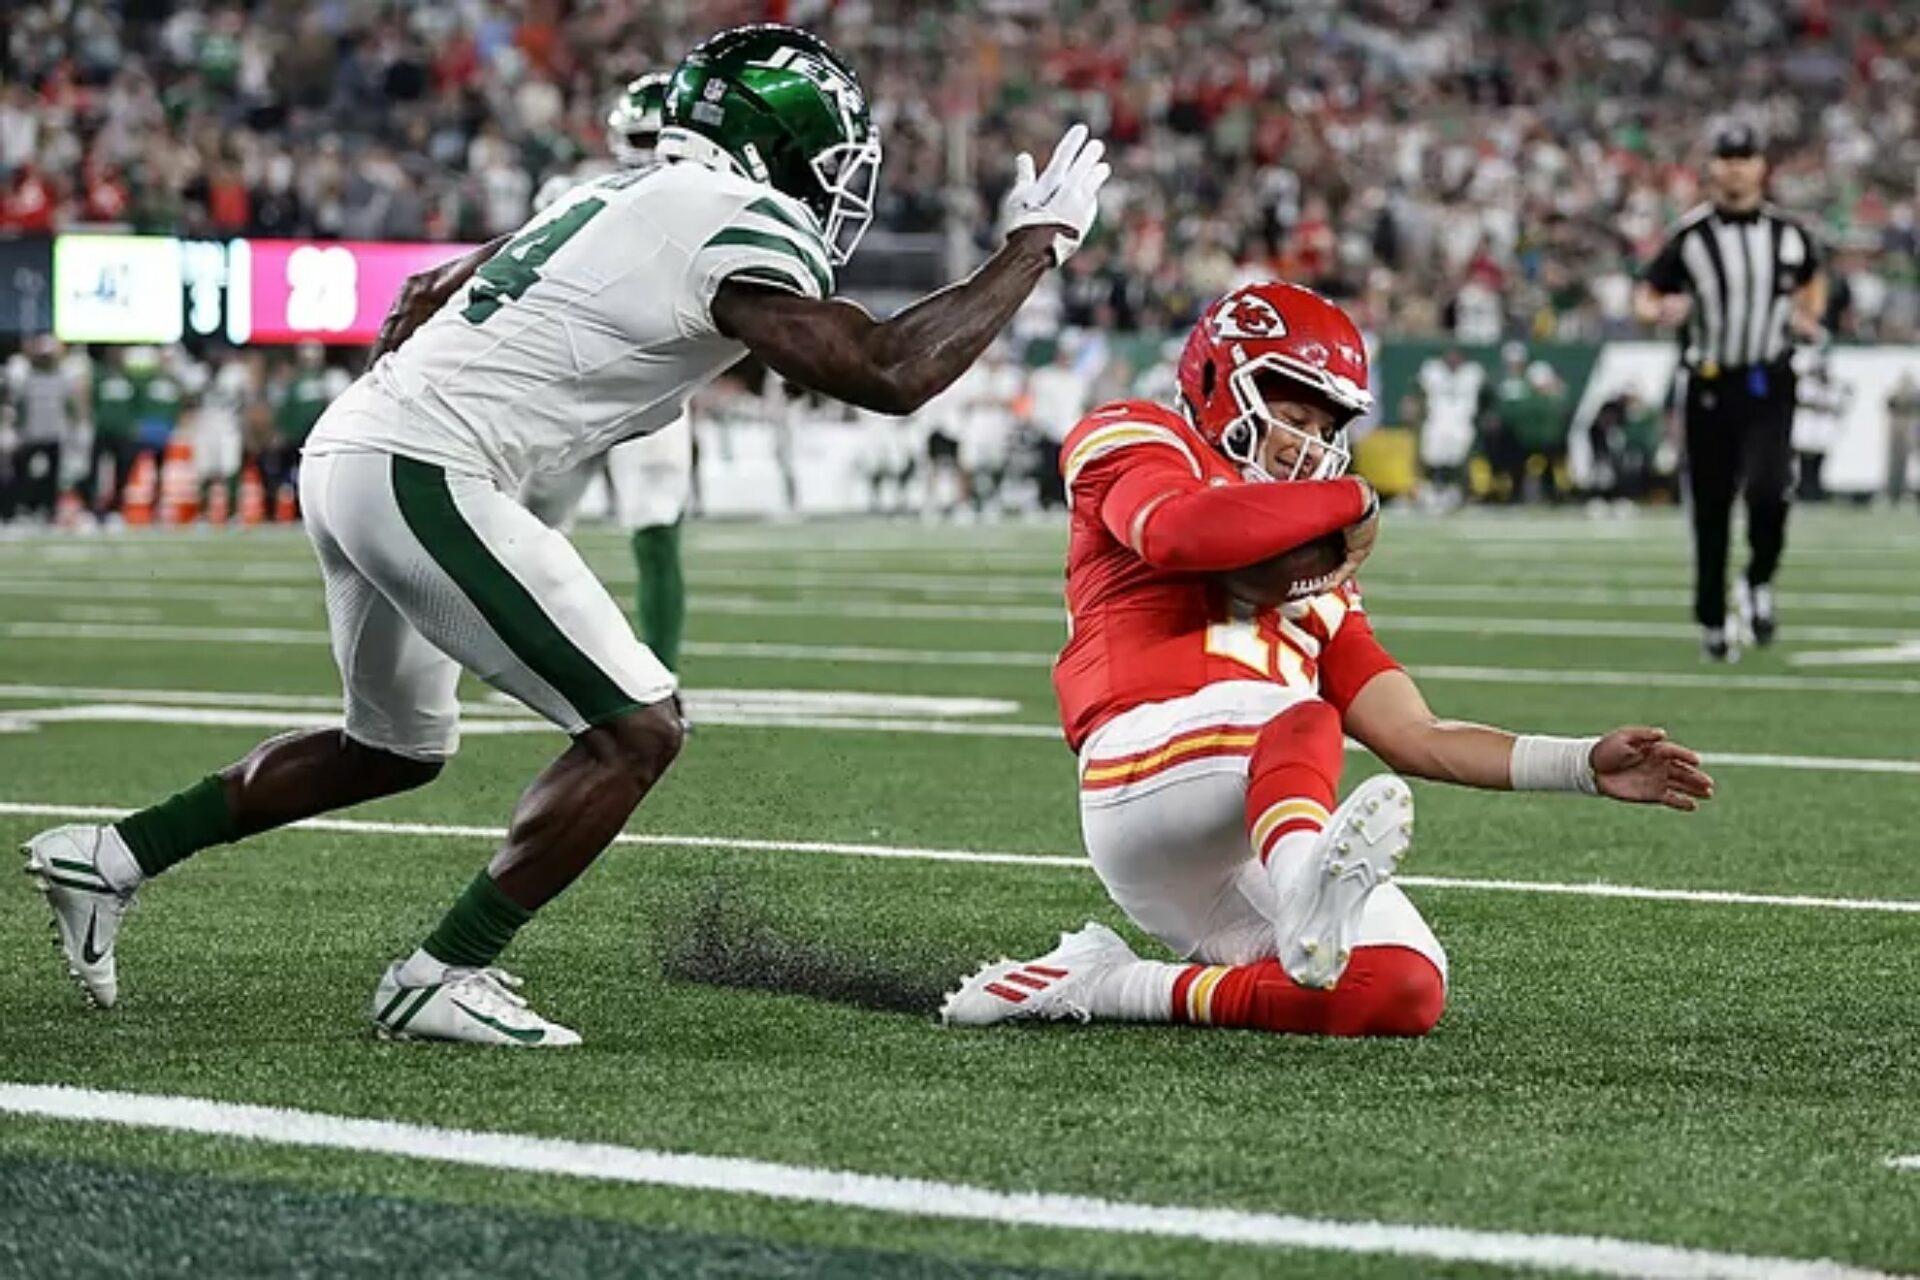 Patrick Mahomes’ Slide Cost Me Money, but Sports Aren’t Rigged: A Short Story cover